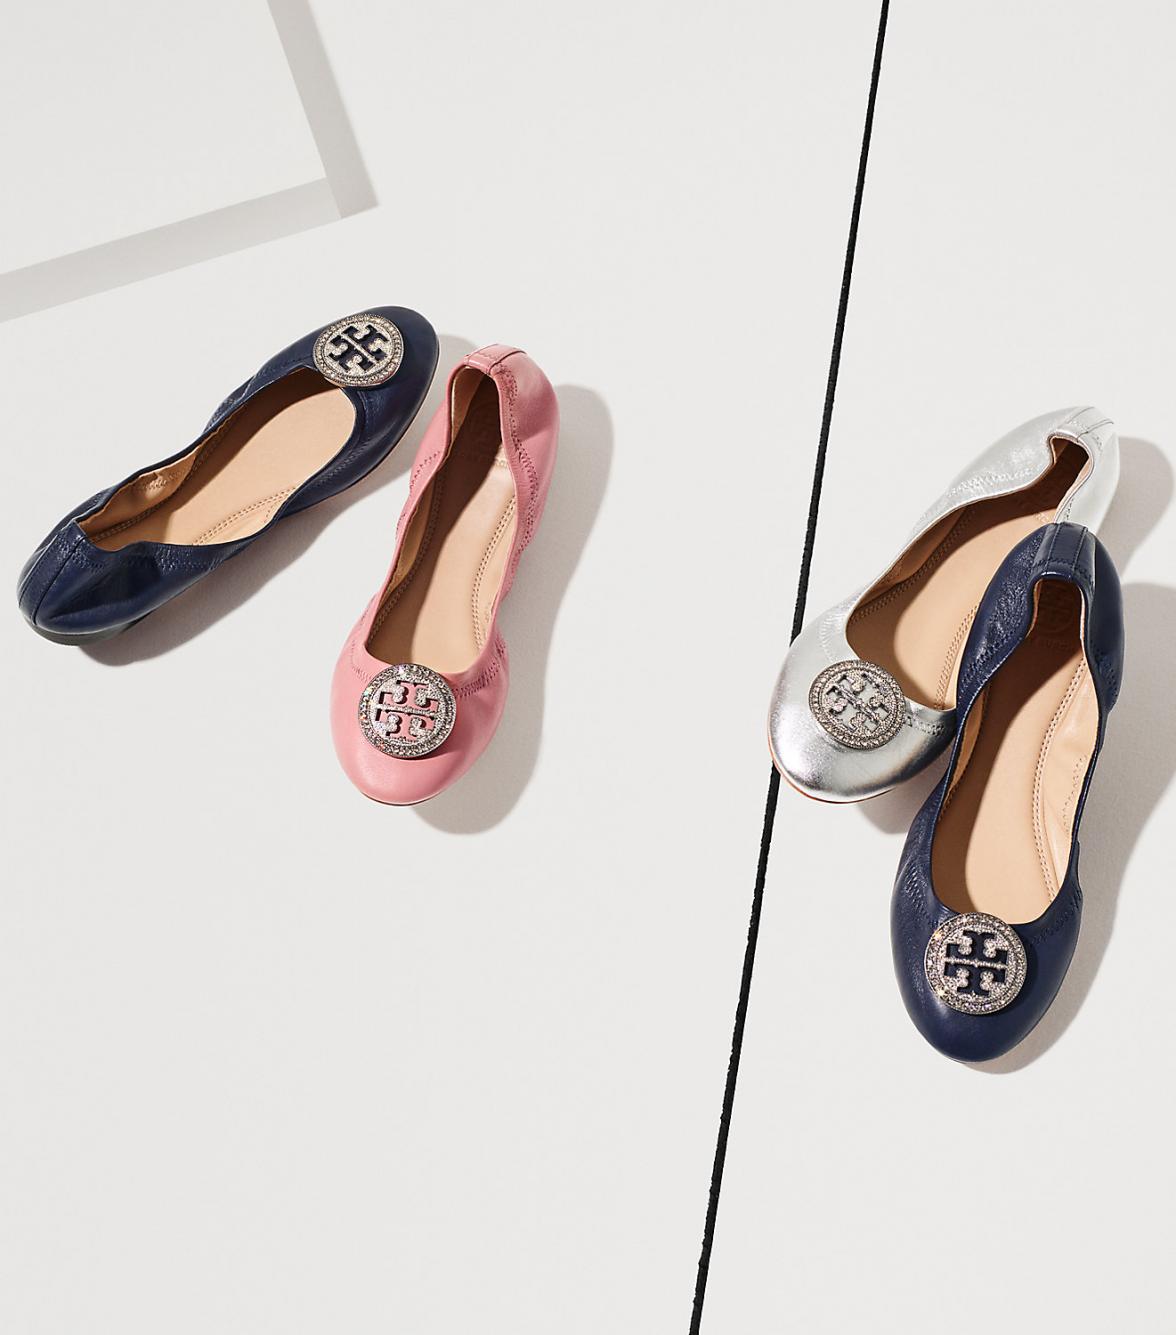 Tory Burch Ballet Flats In Every Color 